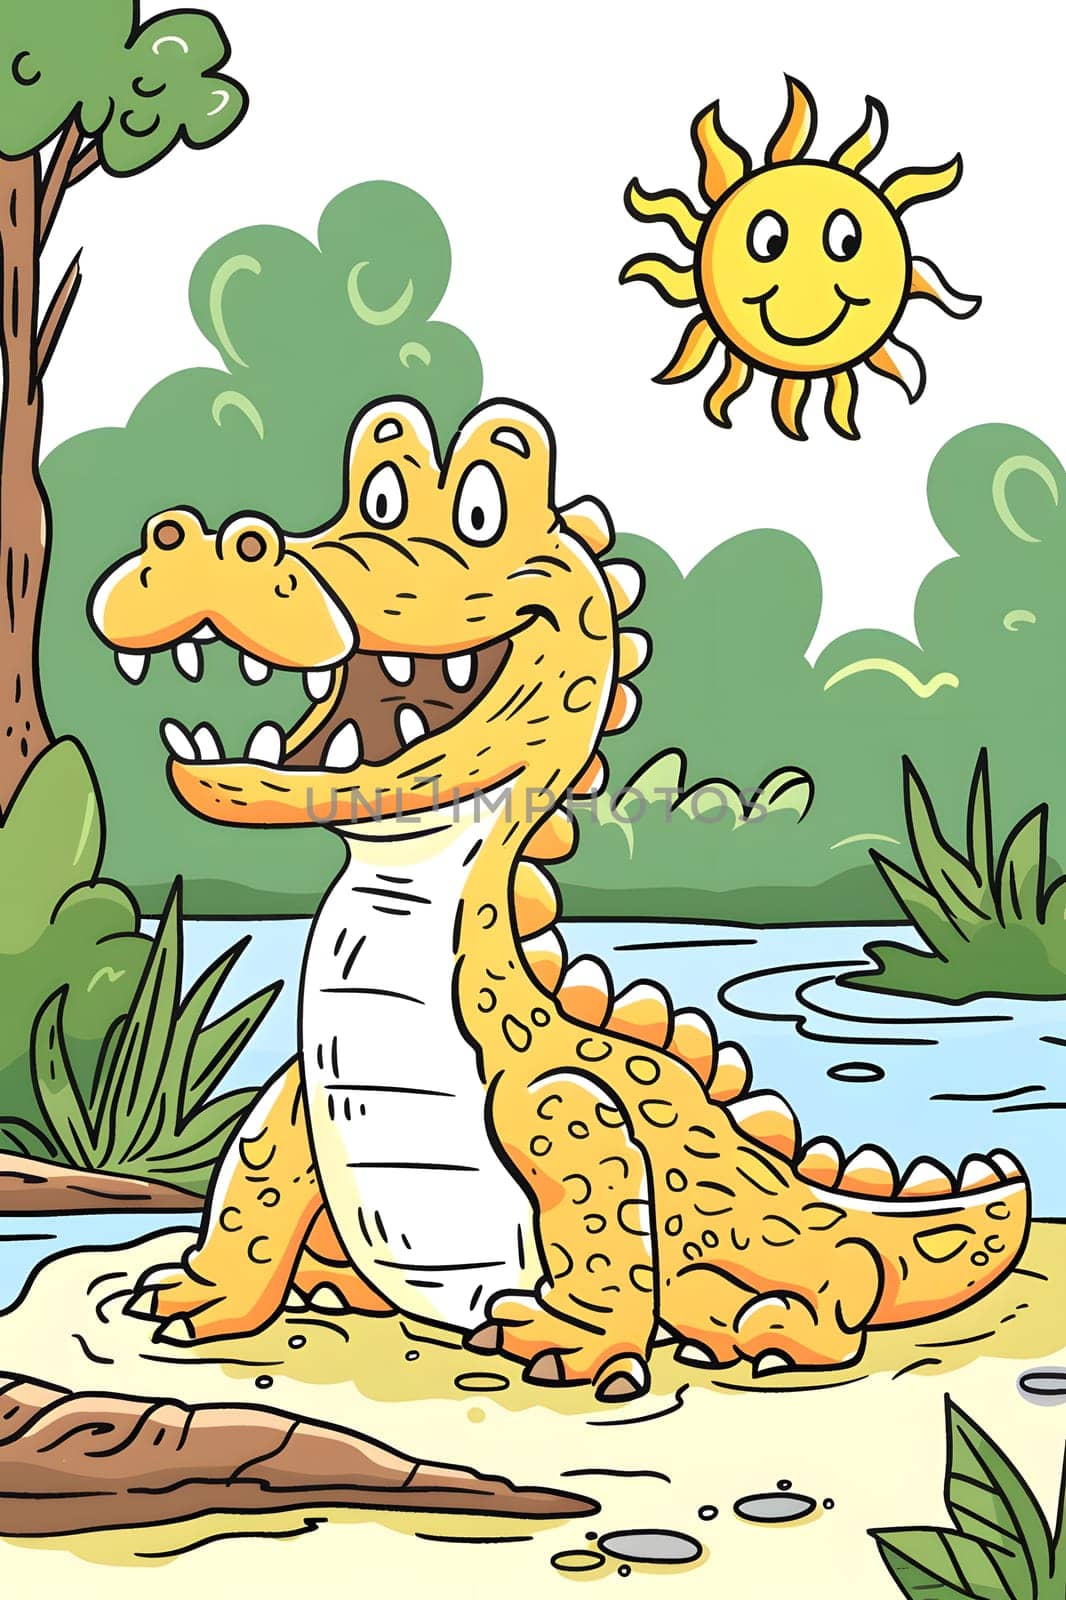 A cartoon crocodile stands by the river in a vibrant ecoregion, with a smiling sun in the background. The happy vertebrate is surrounded by nature and plants